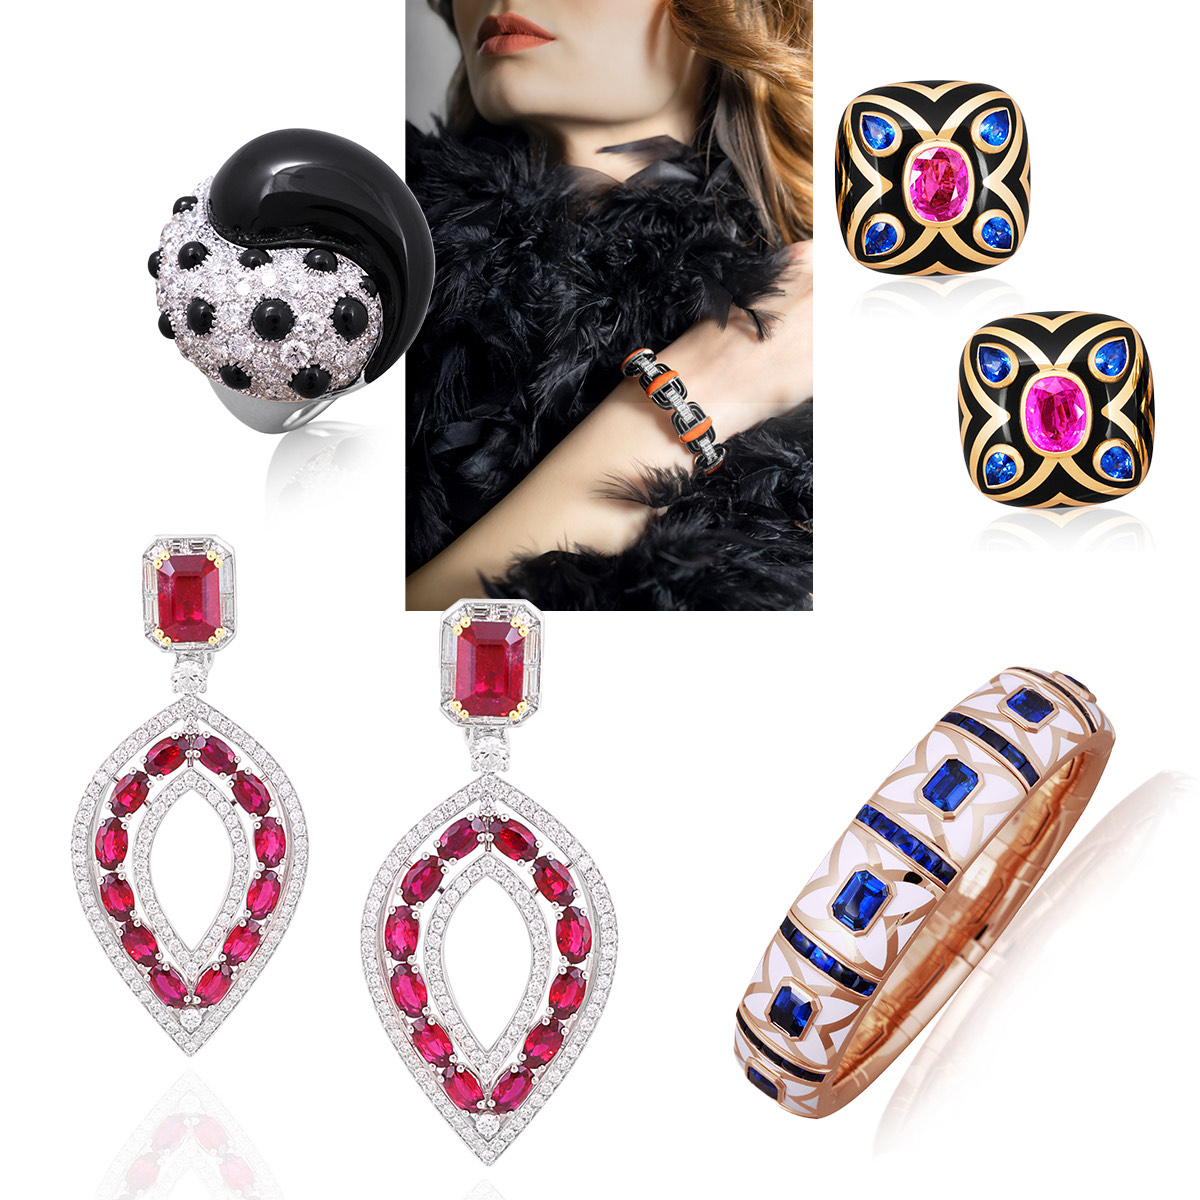 Clockwise from Upper Right – PICCHIOTTI Gem Ceramic Earrings, PICCHIOTTI Gem Ceramic Xpandable Bracelet, PICCHIOTTI Chandelier Ruby & Diamond Earrings, PICCHIOTTI Perfect Harmony ring in Black Onyx and Diamond, PICCHIOTTI Art Deco Gem Ceramic Bracelet